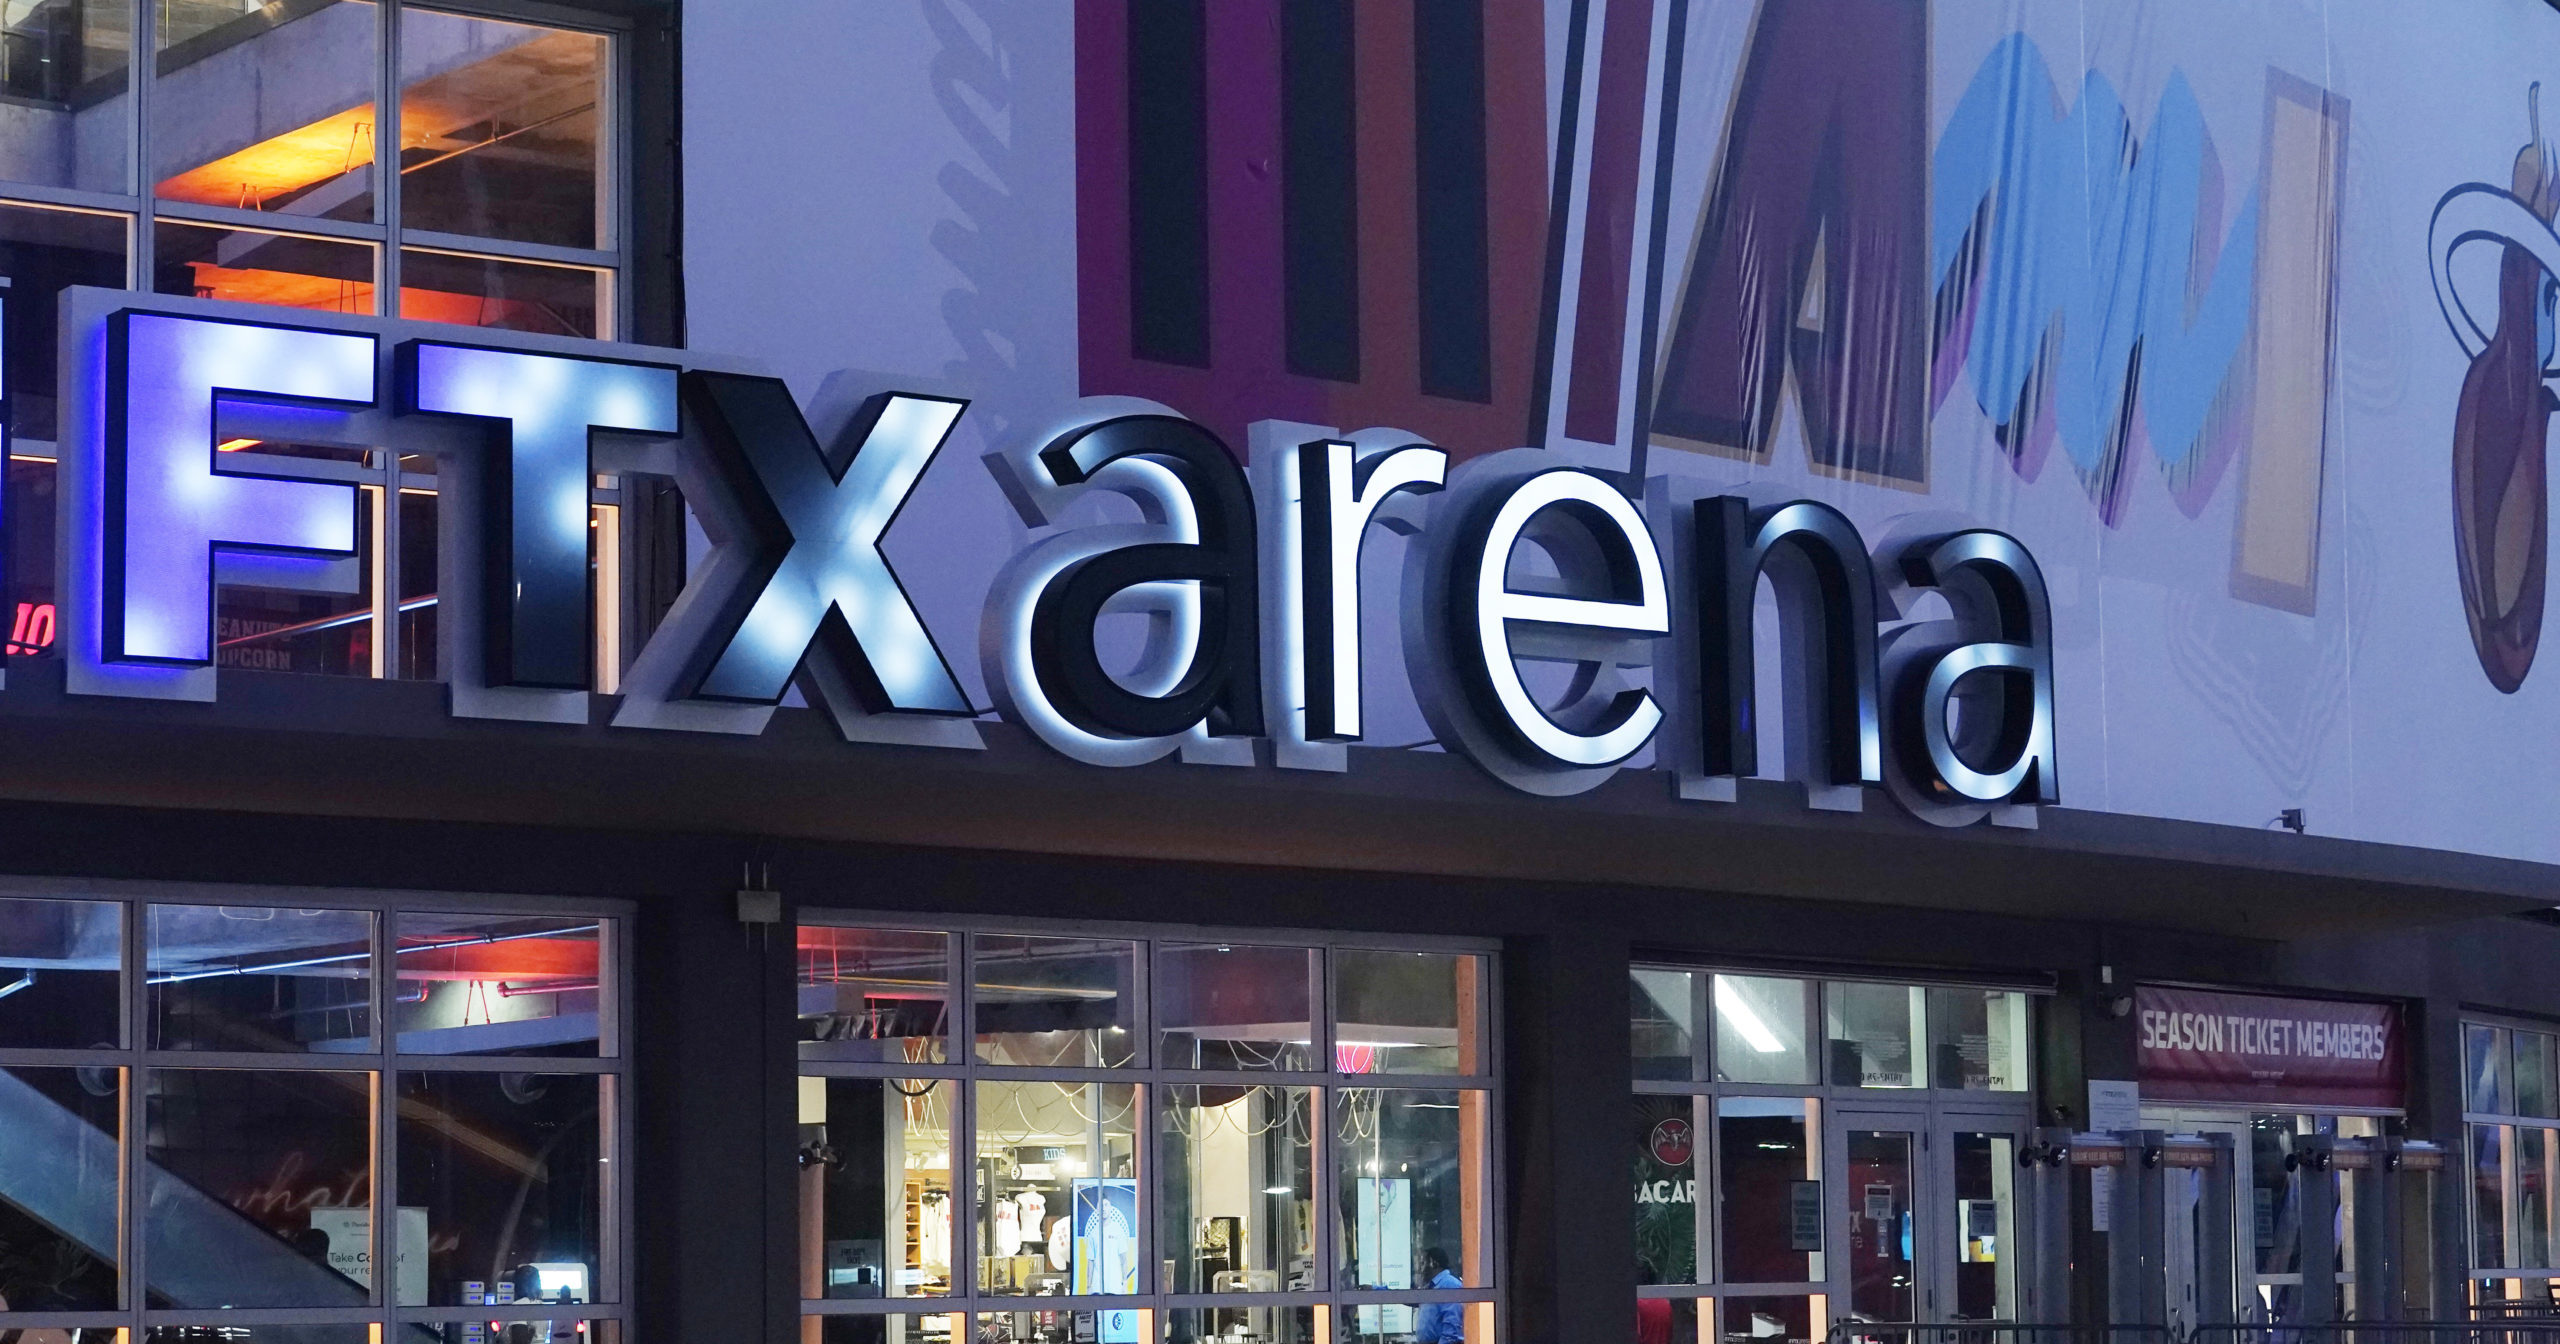 Signage for the FTX Arena, where the Miami Heat basketball team plays, is illuminated in Miami, Florida, on Saturday.